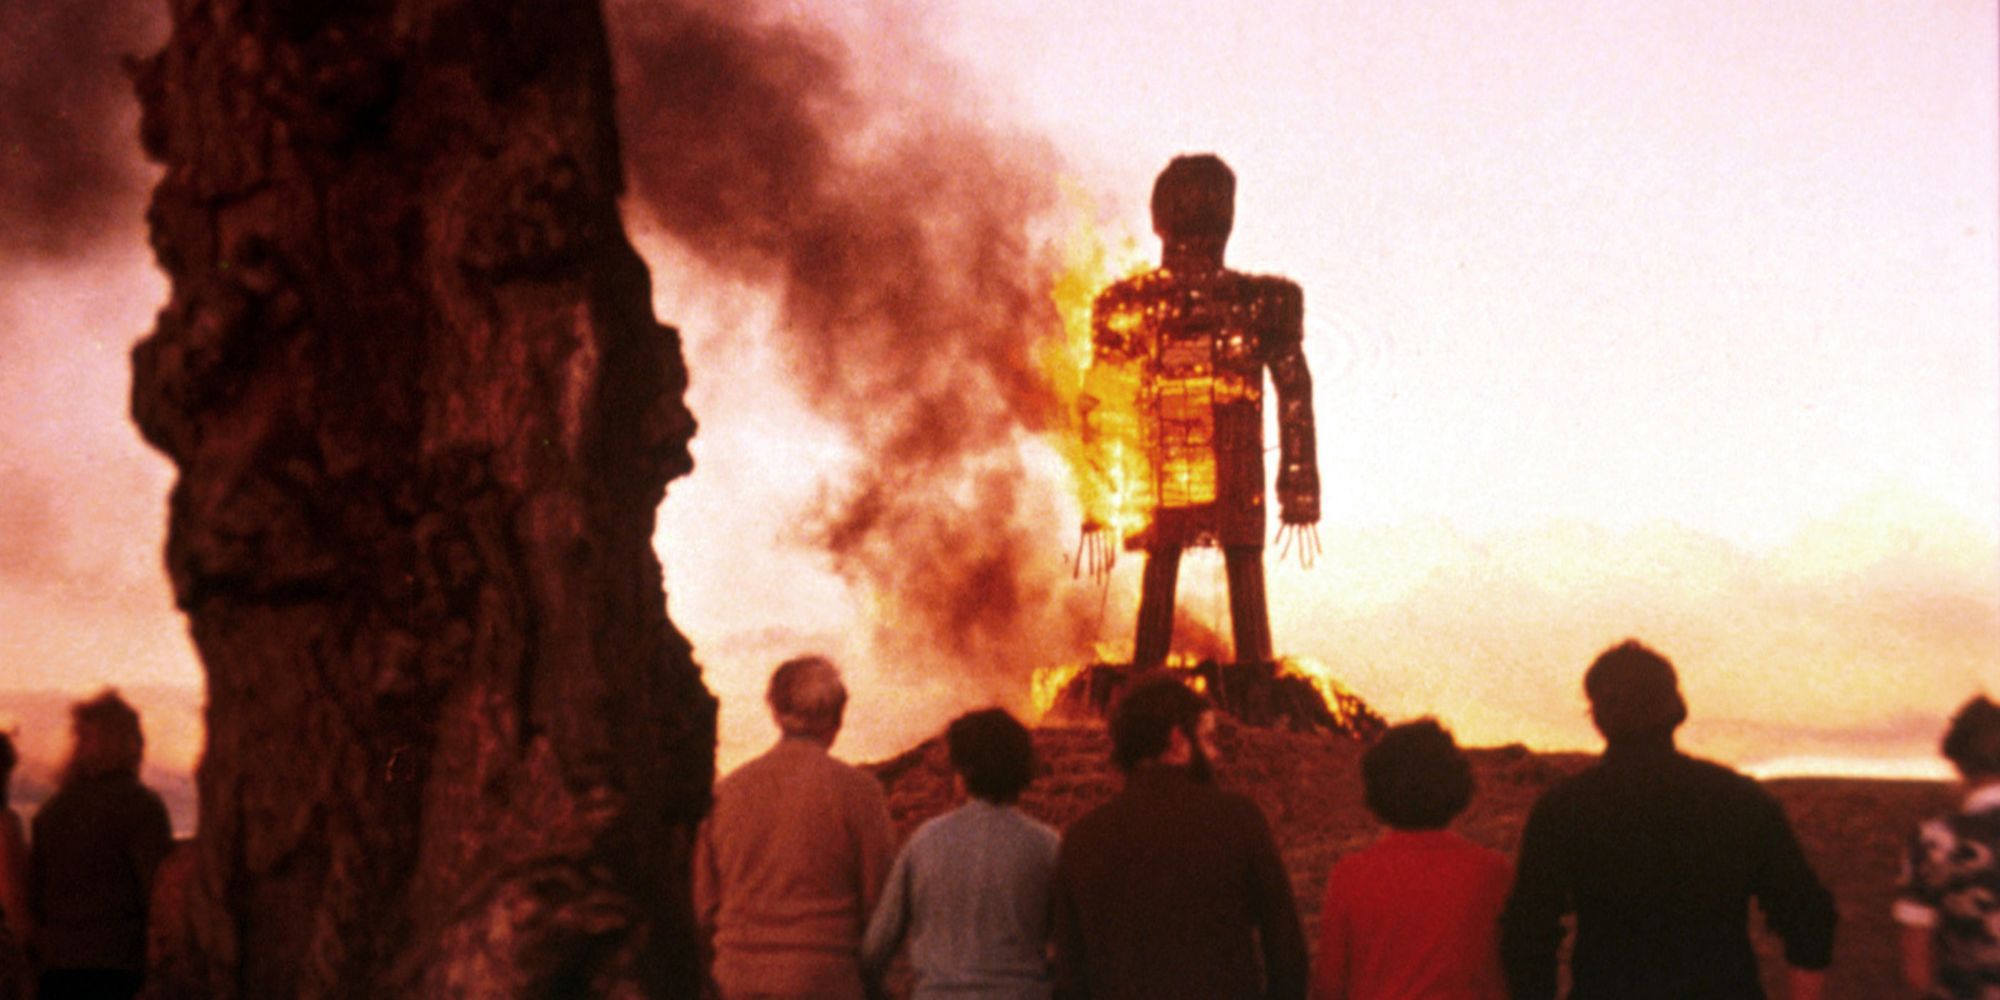 A group of people watching a burning statue in The Wicker Man